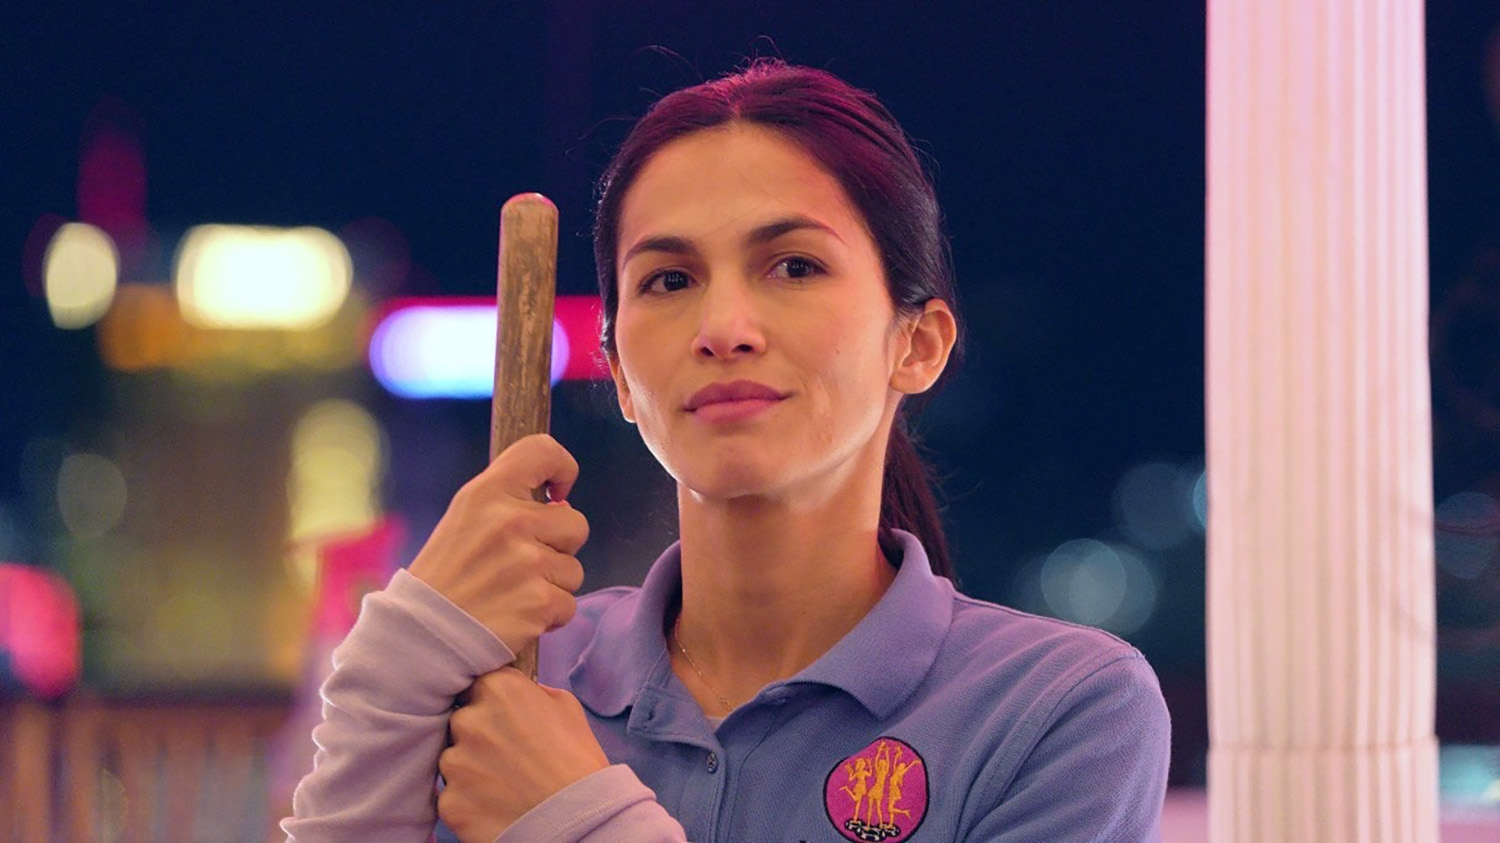 Elodie Yung as Thony De La Rosa in The Cleaning Lady Season 1.